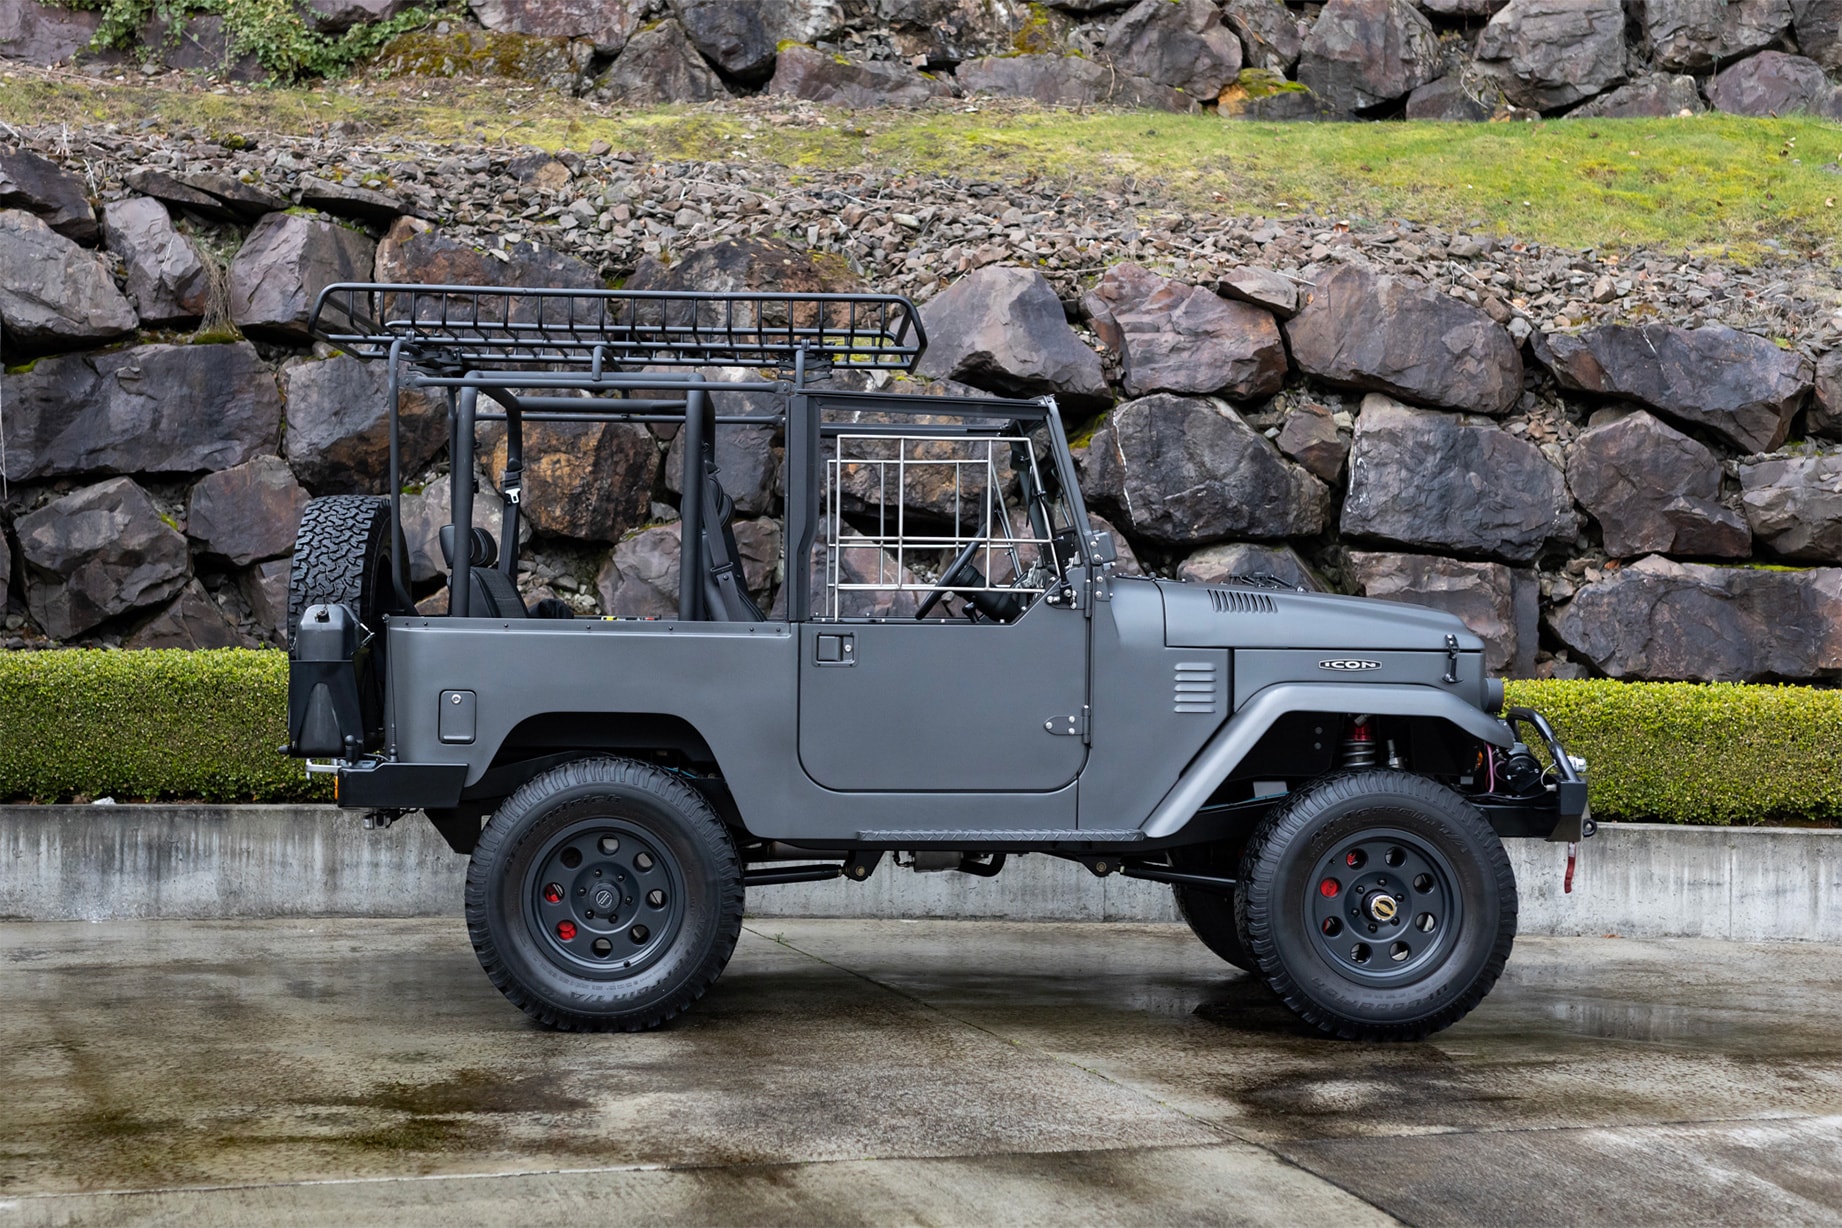 1962 ICON FJ40 Land Cruiser Collecting Cars Listing 4x4 off-roading jeeps FJ Cruiser classic cars auctions 